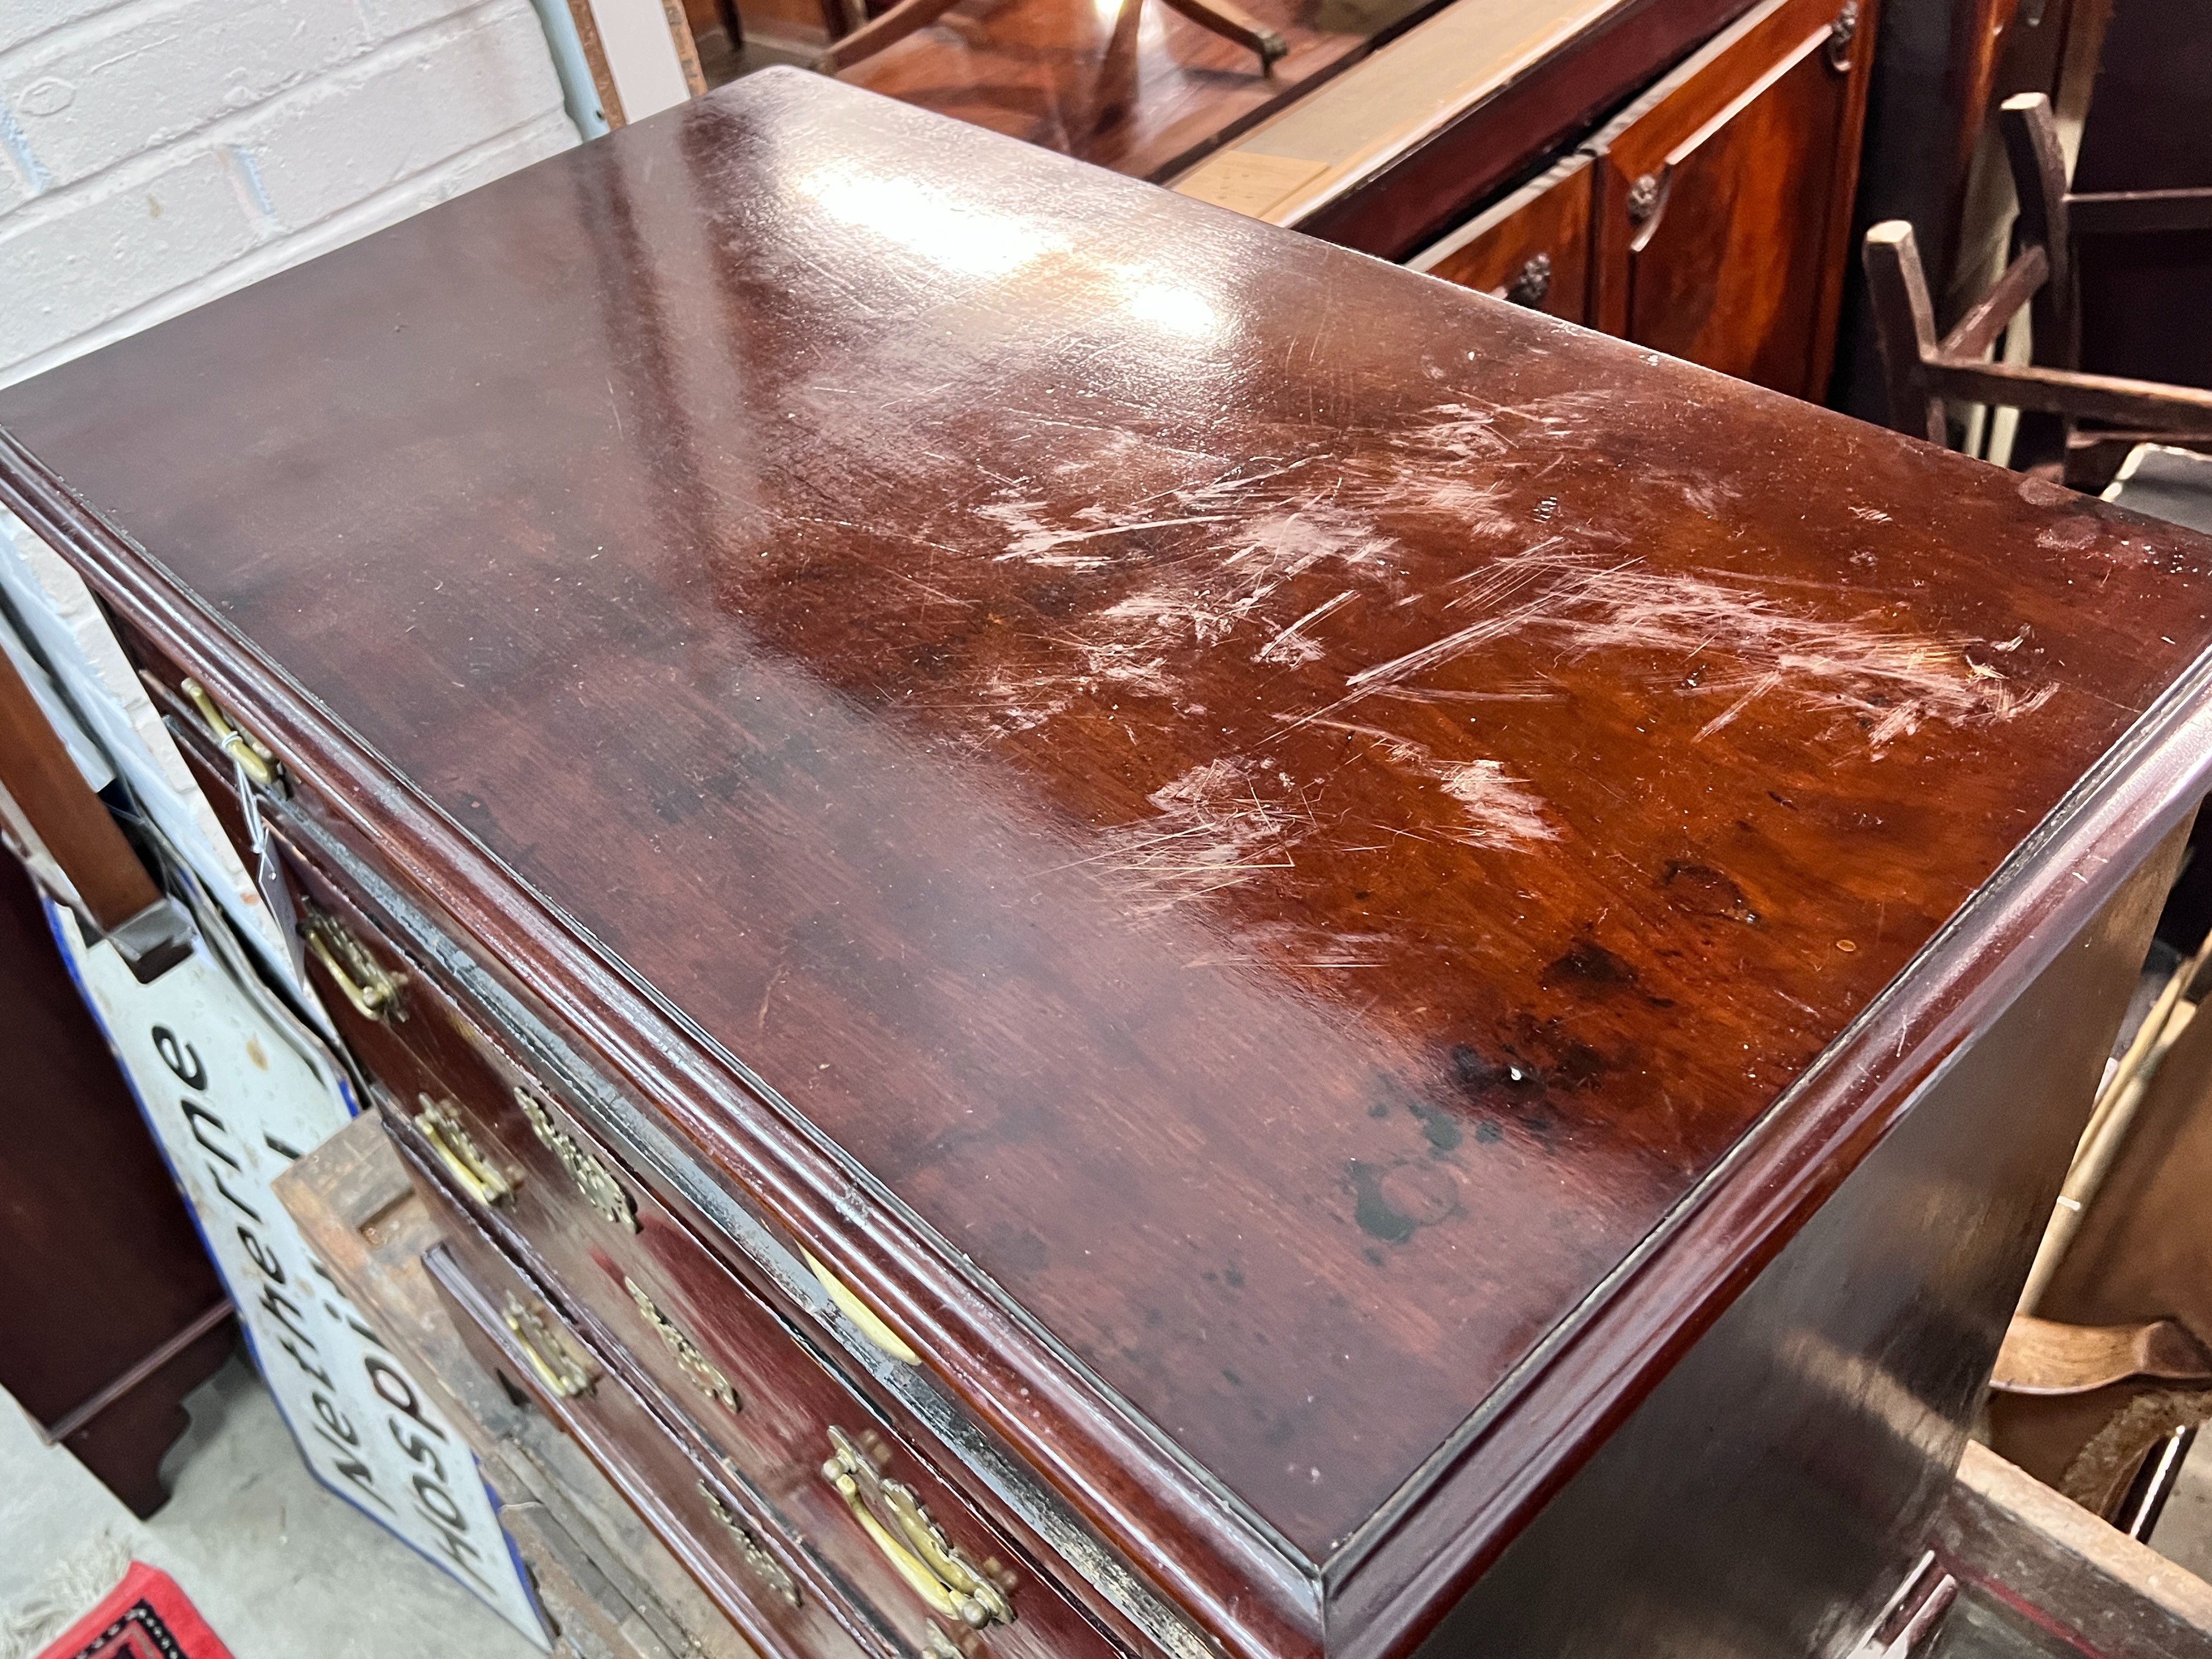 A small George III mahogany four drawer chest, width 79cm, depth 45cm, height 73cm